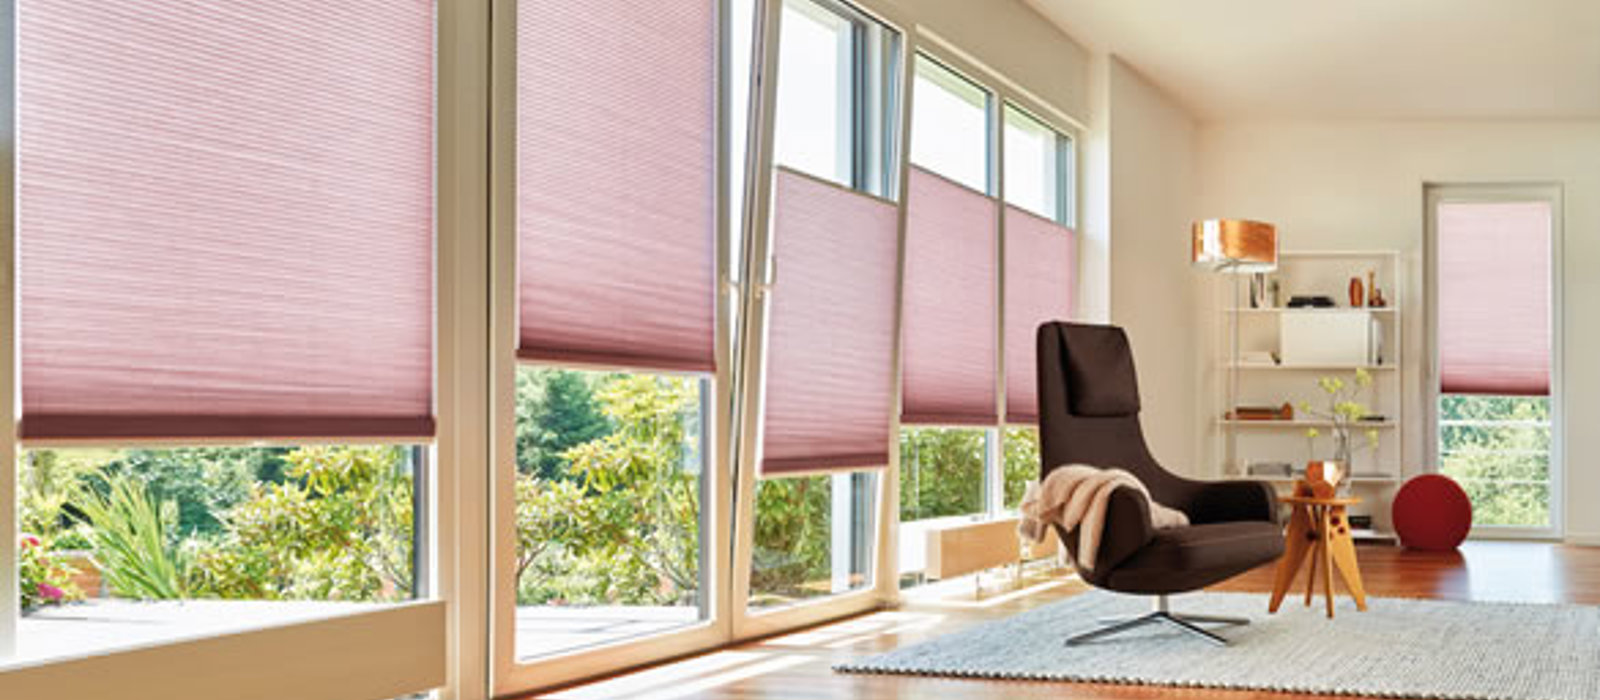 Neutral living room decor with warming pink Duette blinds